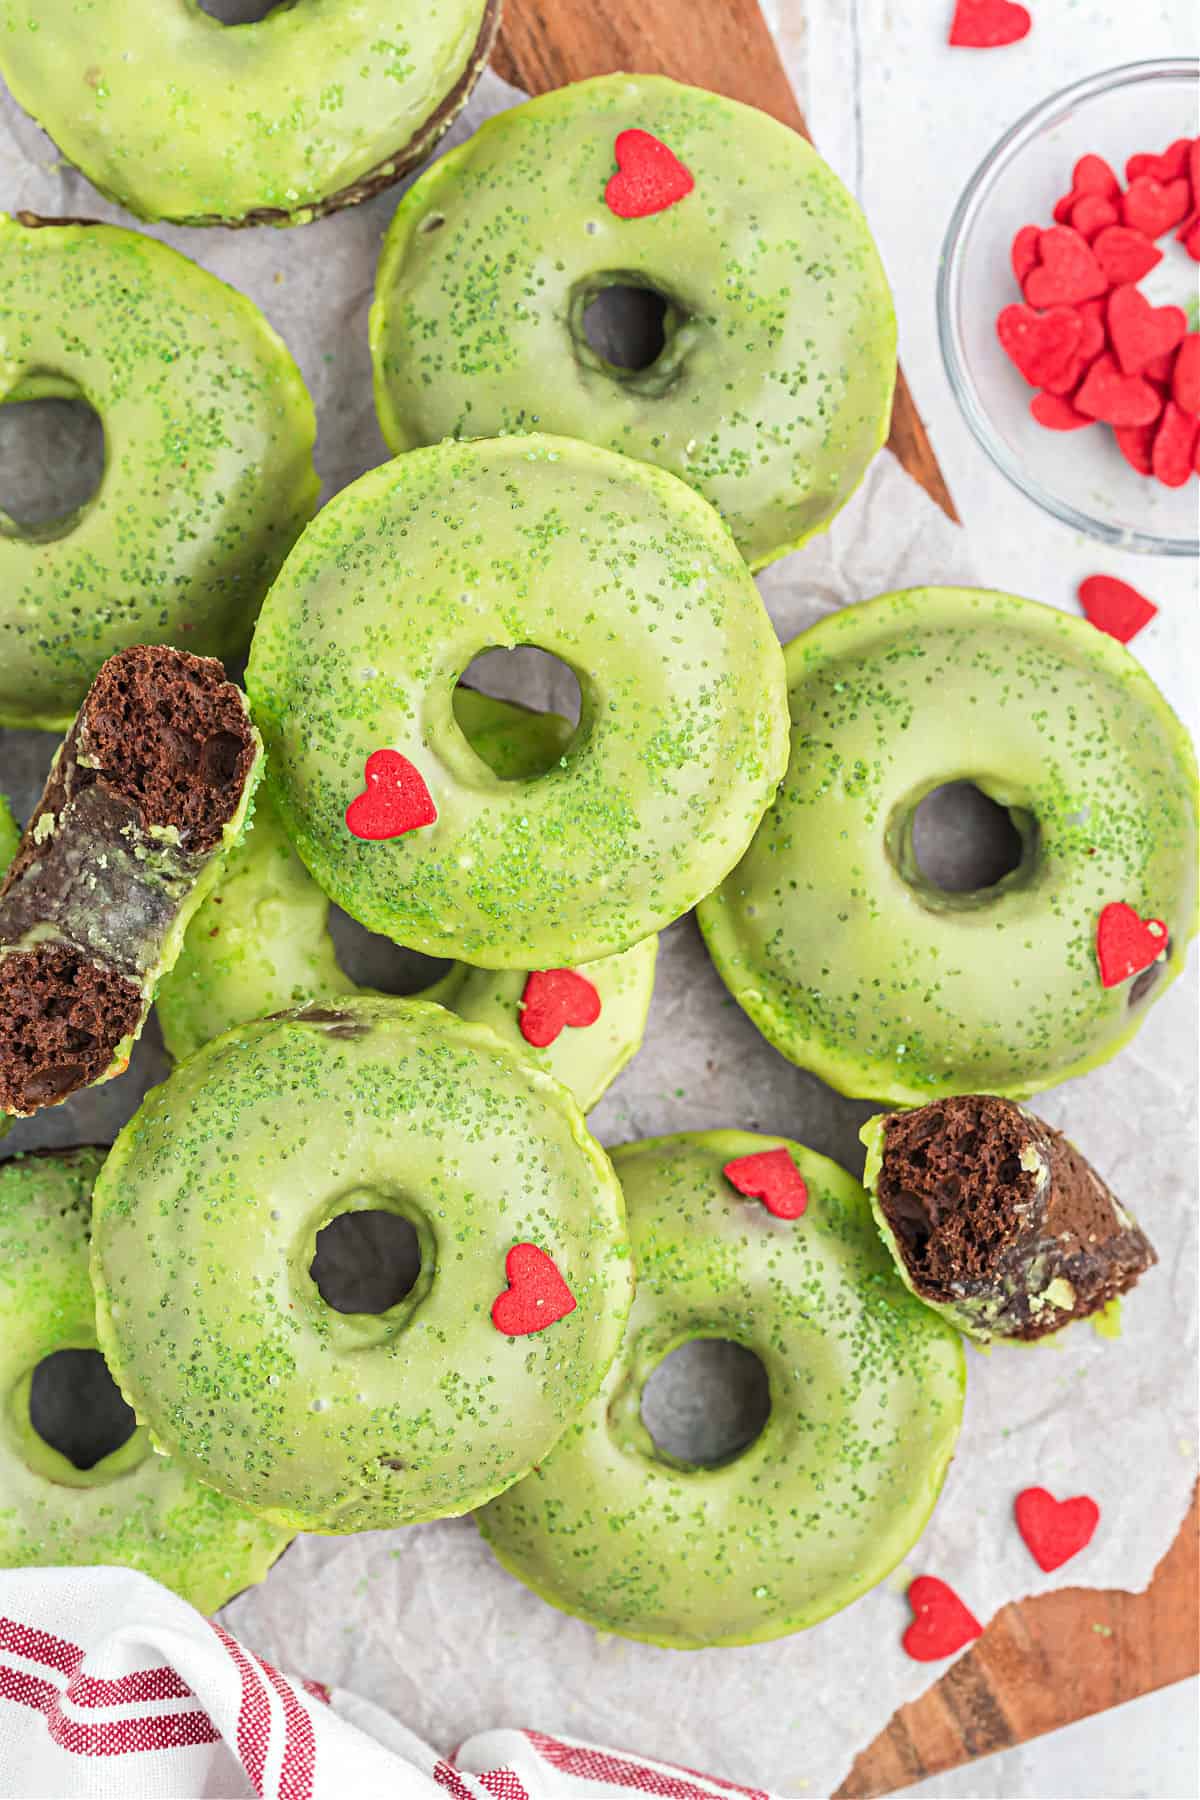 Chocolate donuts with green icing and red heart sprinkles.